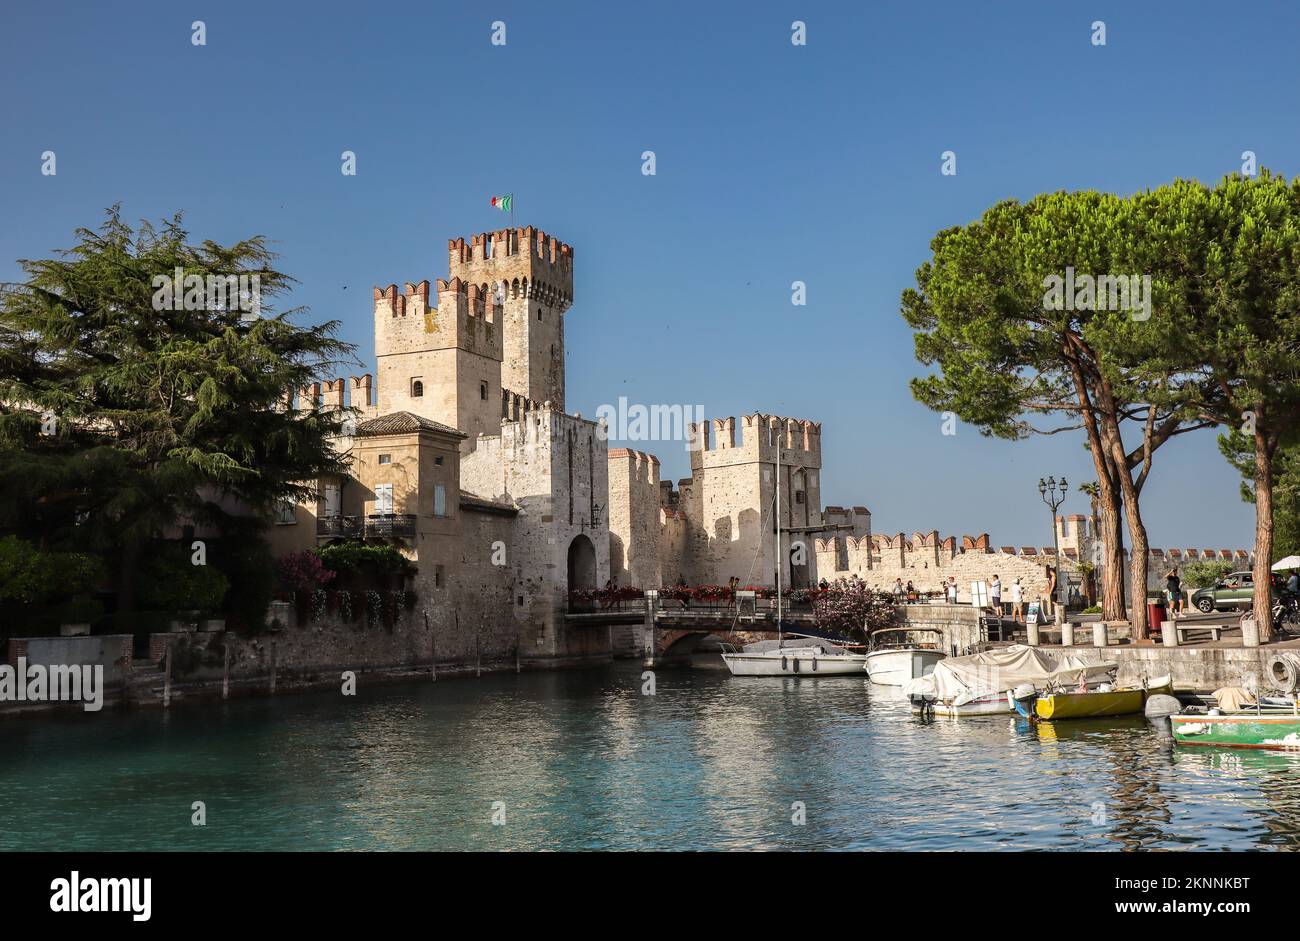 Sirmione, Italy - June 25, 2022: Scaligero Castle with Lake Garda, Small Boat and Tree. Beautiful View of Fortress in Northern Italy with Blue Sky. Stock Photo